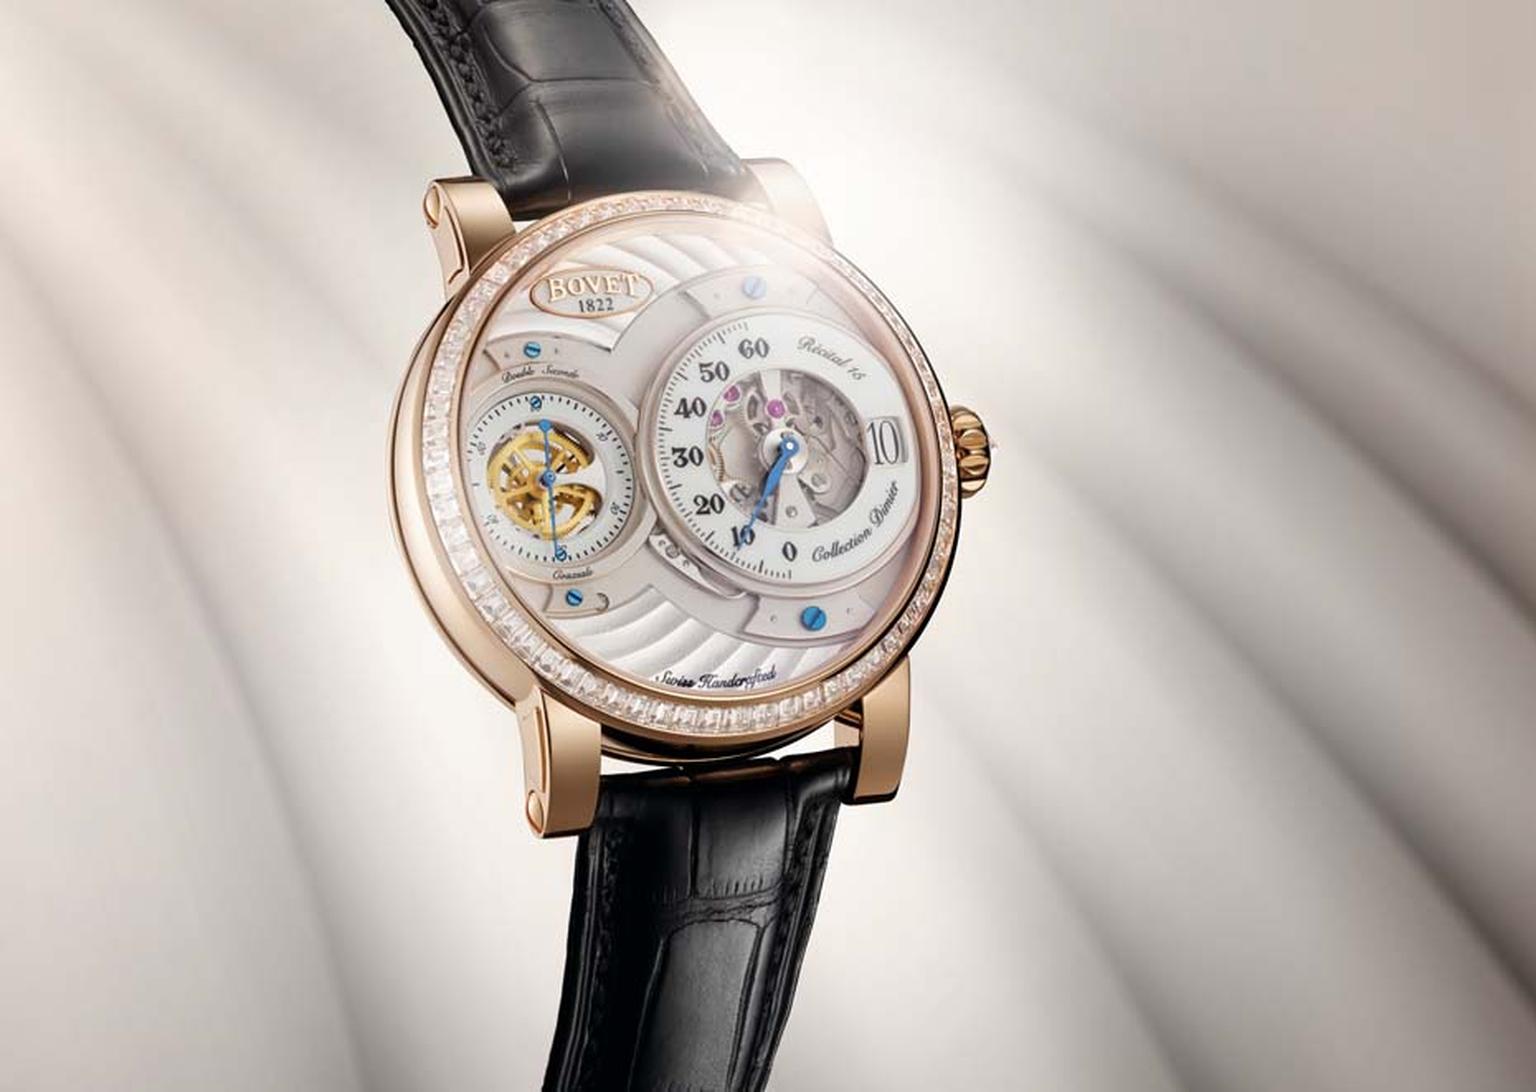 Bovet Recital 15 currently houses the Virtuoso 2, Bovet's in-house crafted calibre with a five-day power reserve.